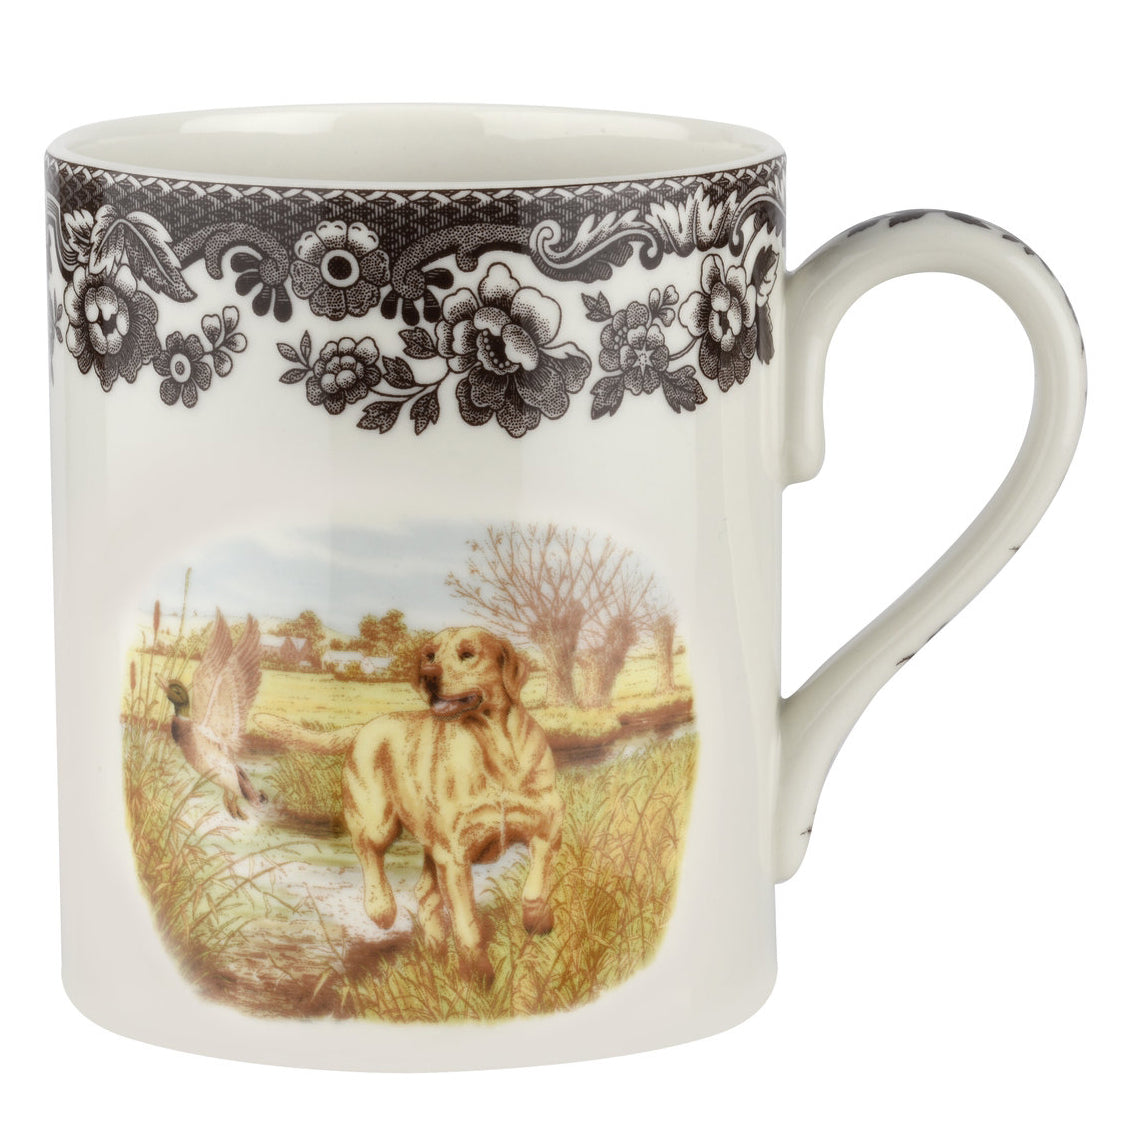 Spode Woodland Large Mug-16 oz.-HOME/GIFTWARE-Yellow Lab-Kevin's Fine Outdoor Gear & Apparel